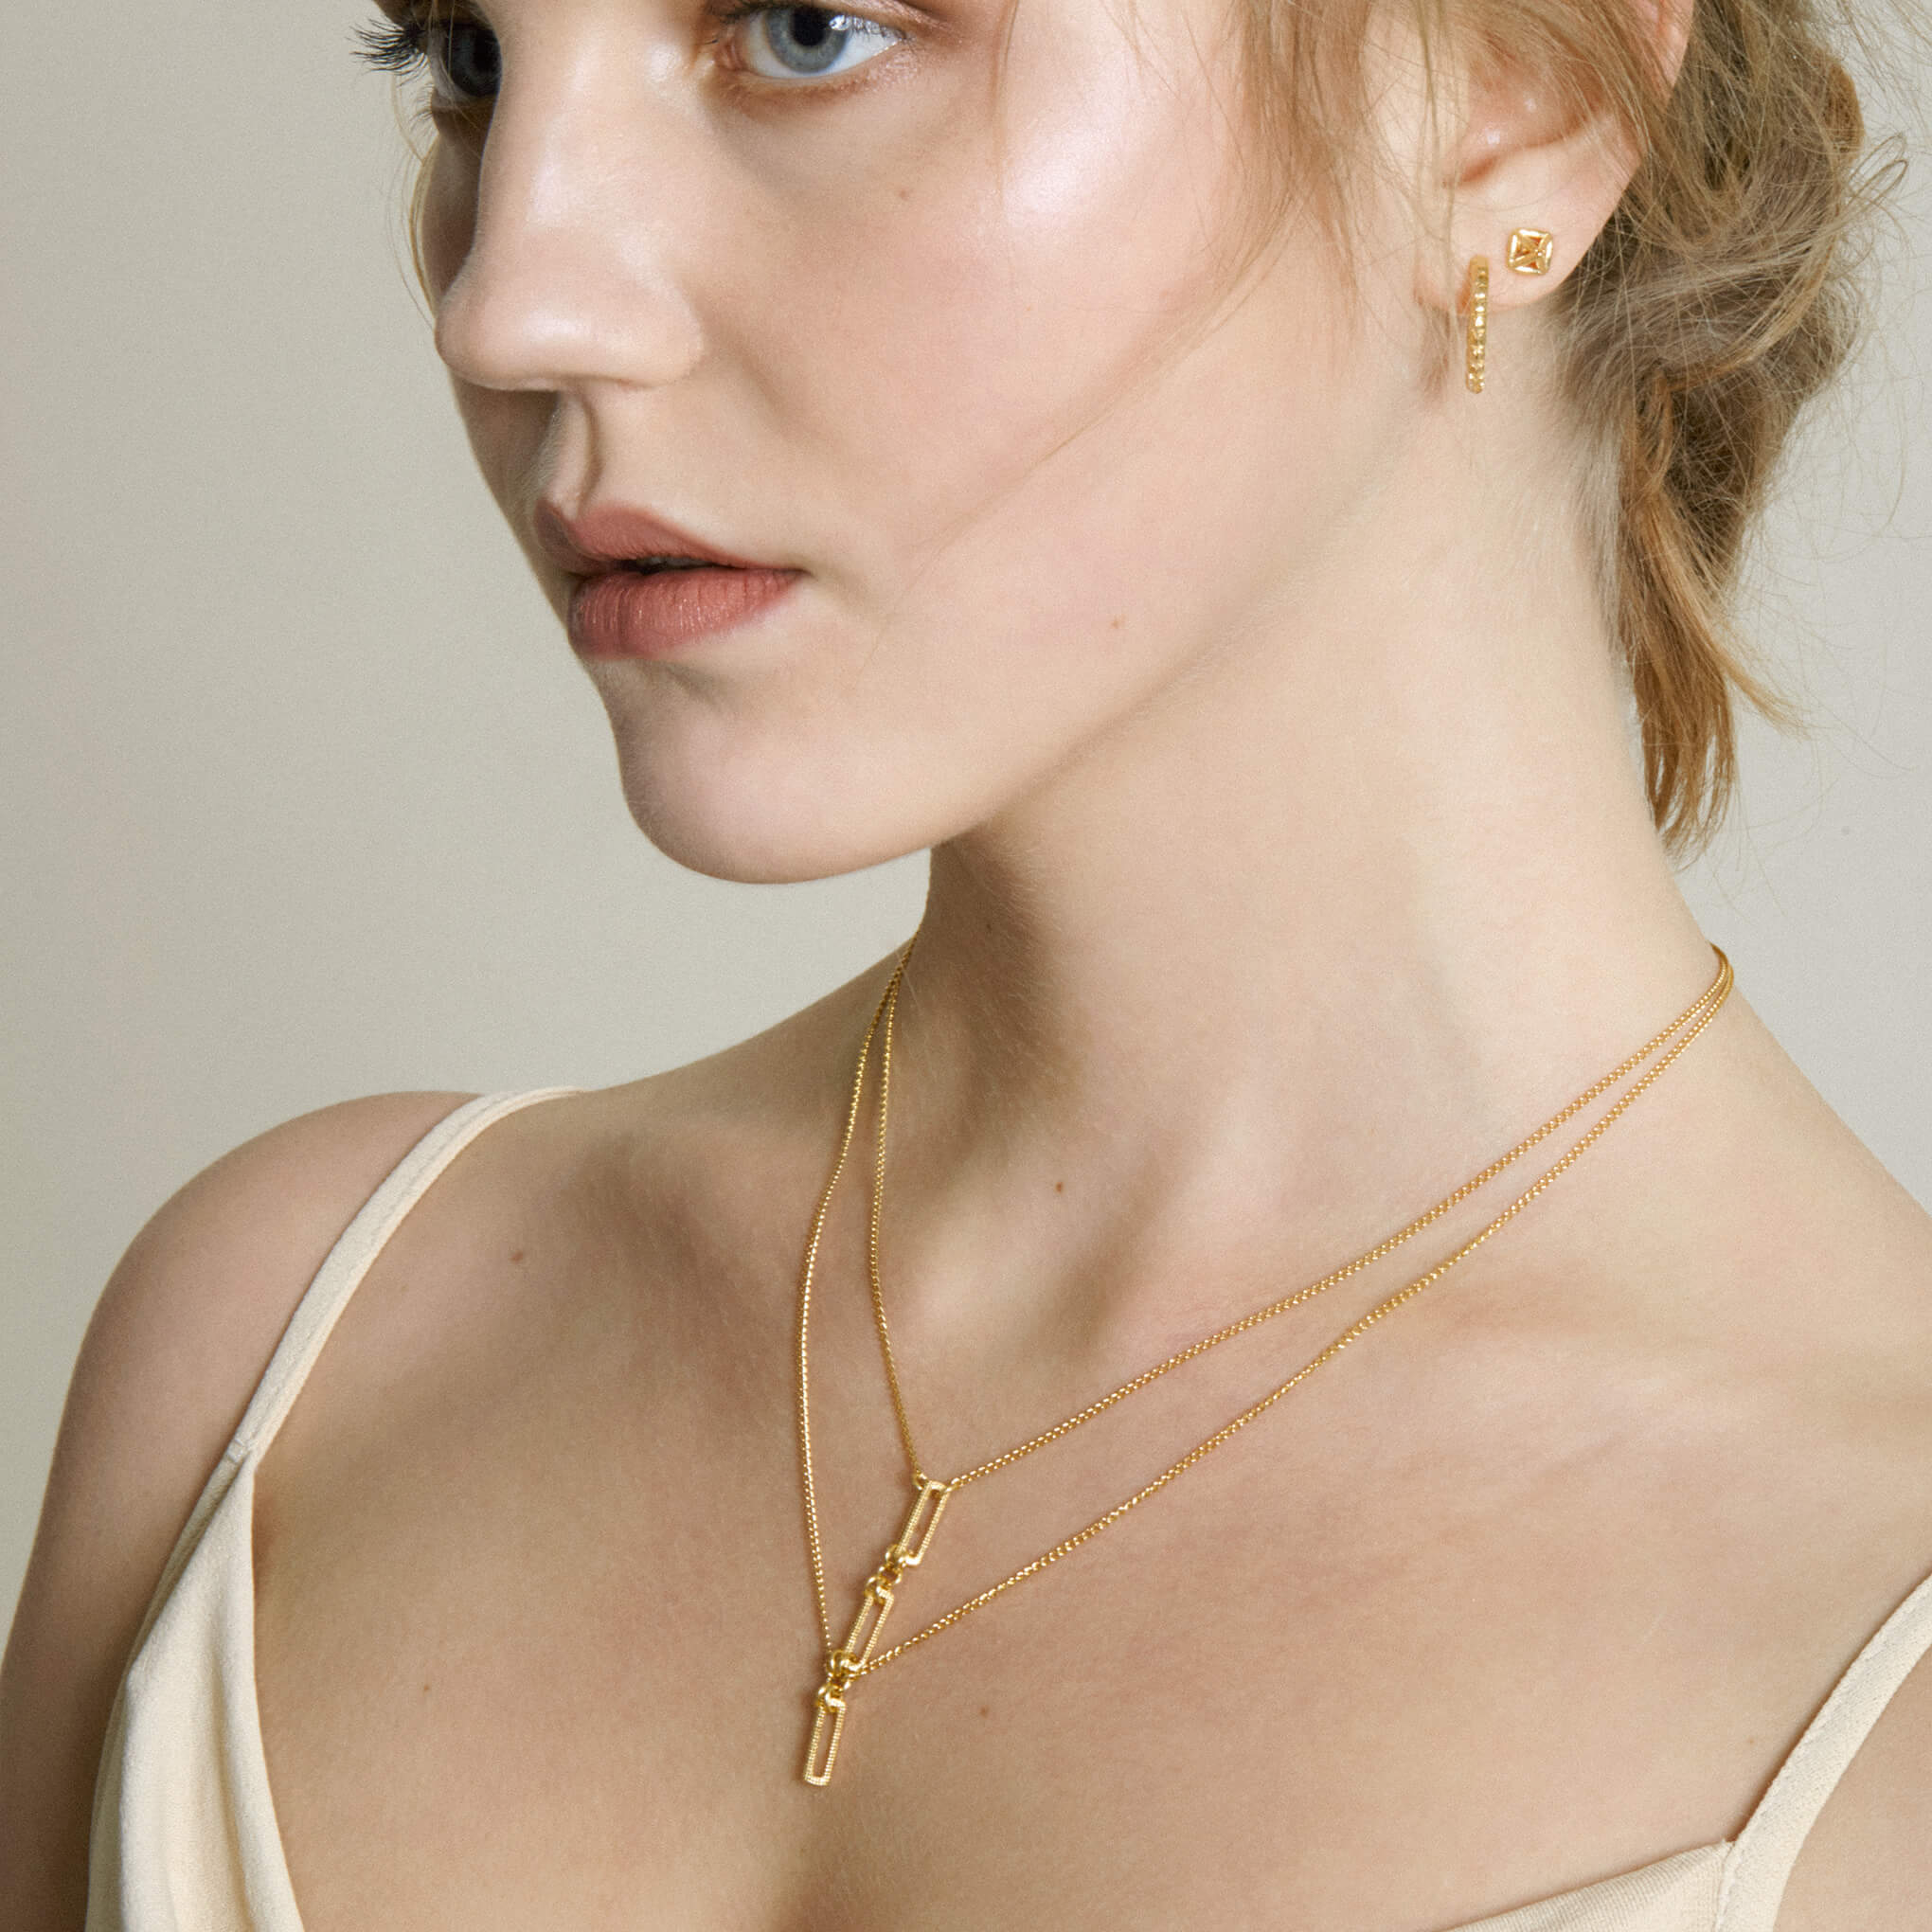 A model wearing a gold necklace and hoop and pyramid stud earrings